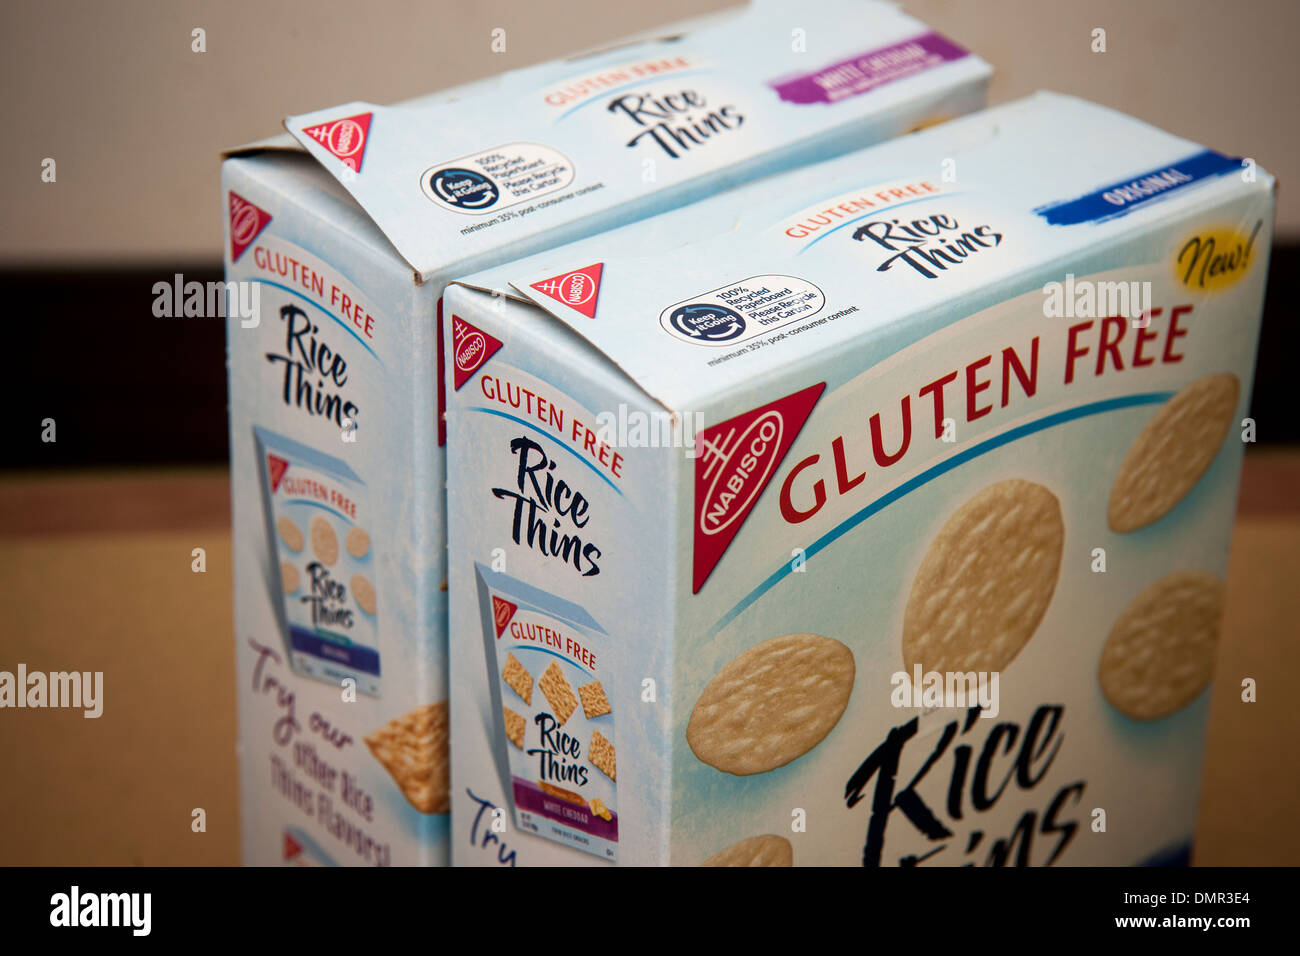 Boxes of gluten free rice thins by Mondelez (Nabisco) are seen in a grocery in New York Stock Photo